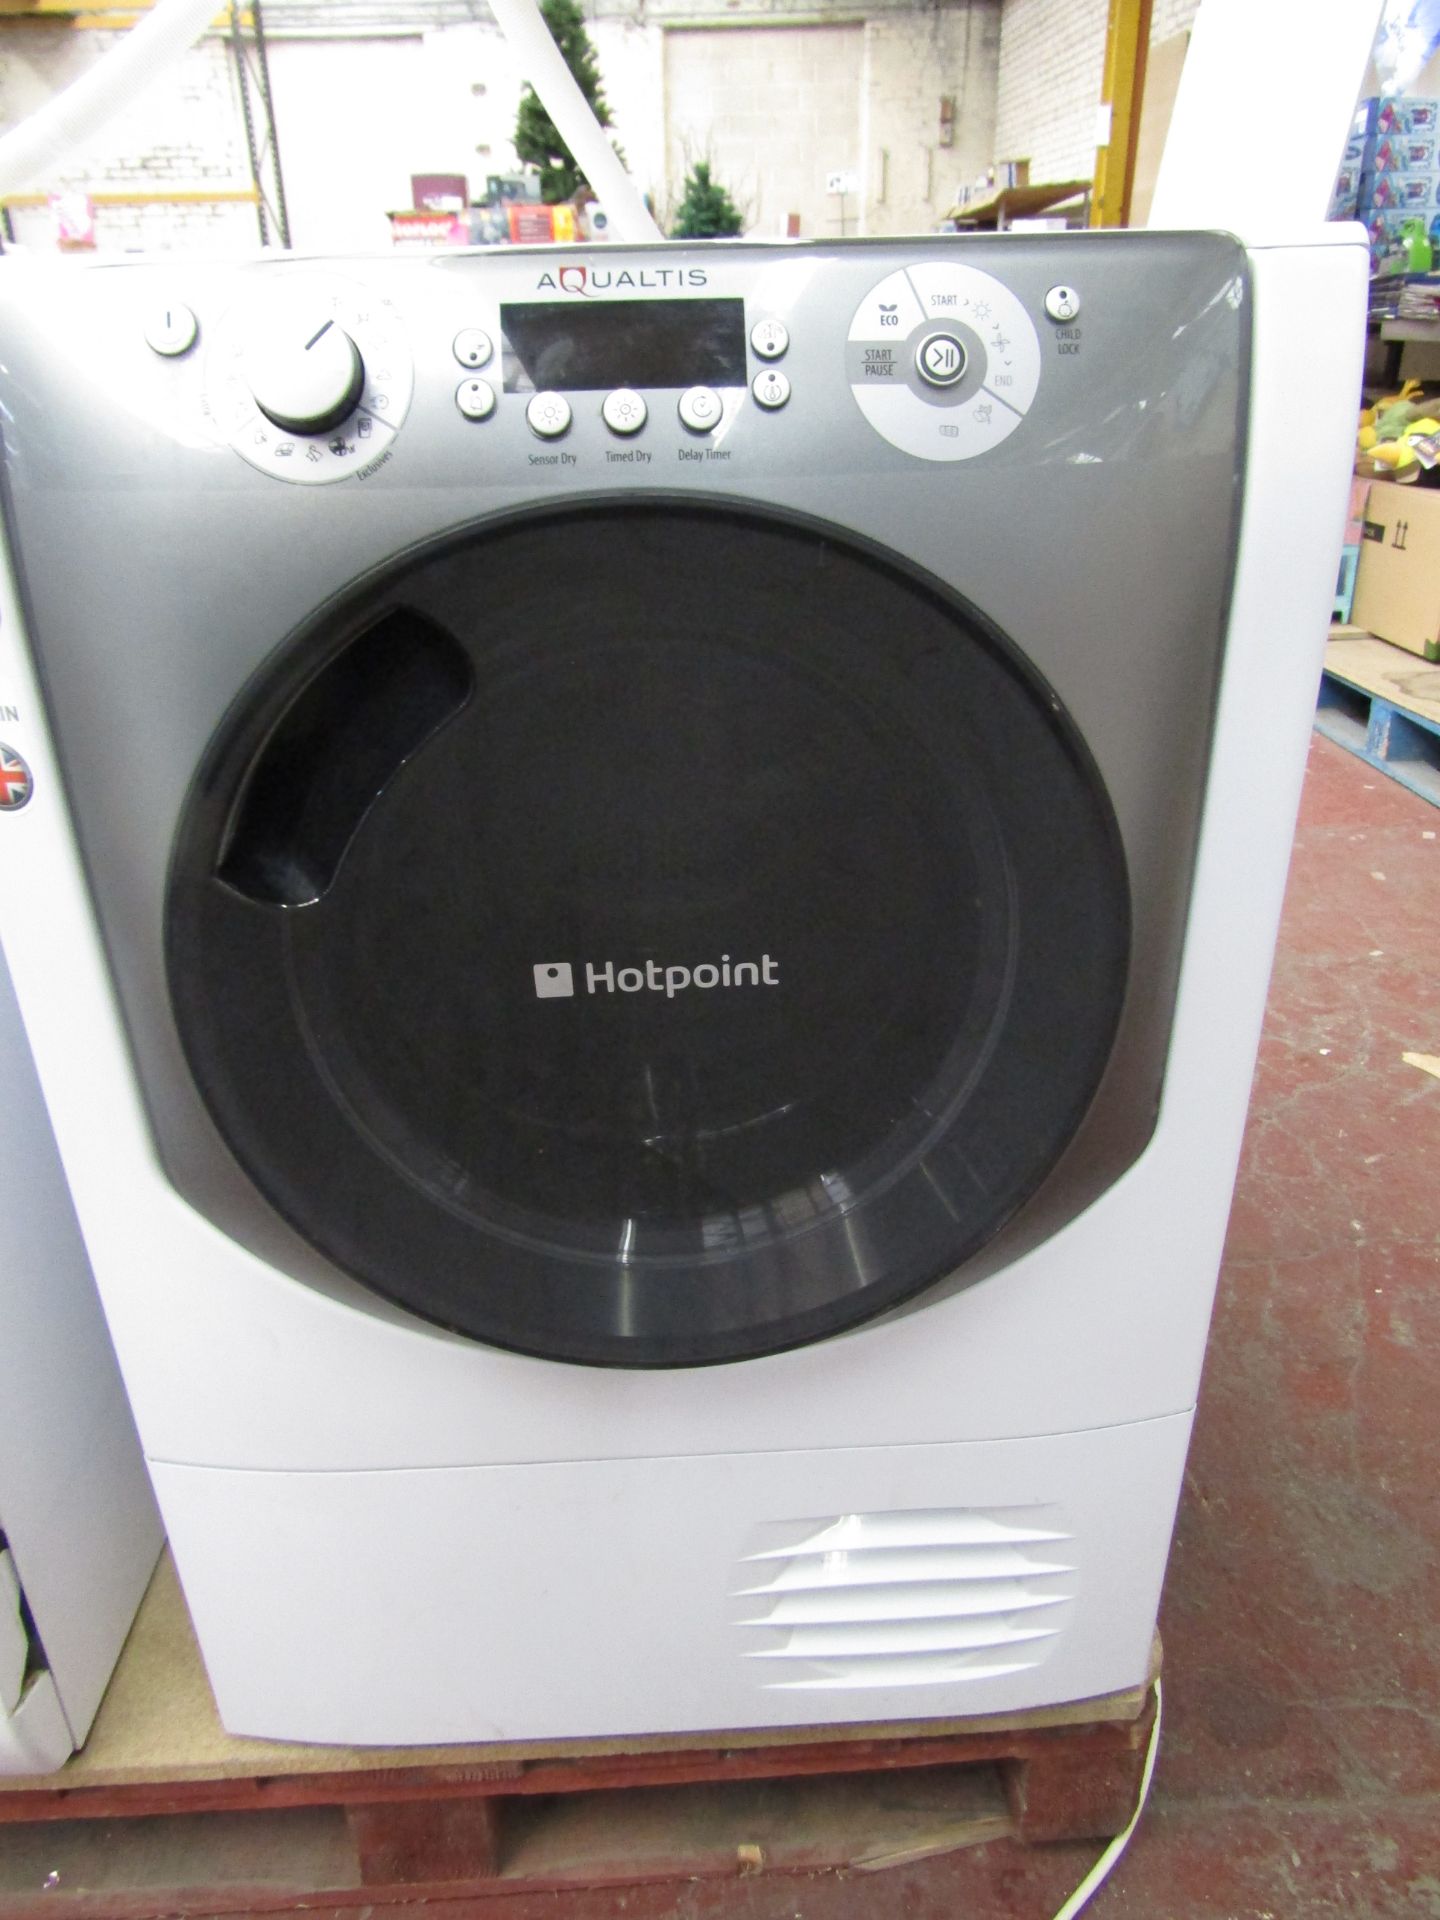 Hotpoint Aqualtis AQC9 BF7 E 9KG condenser dryer, tested working